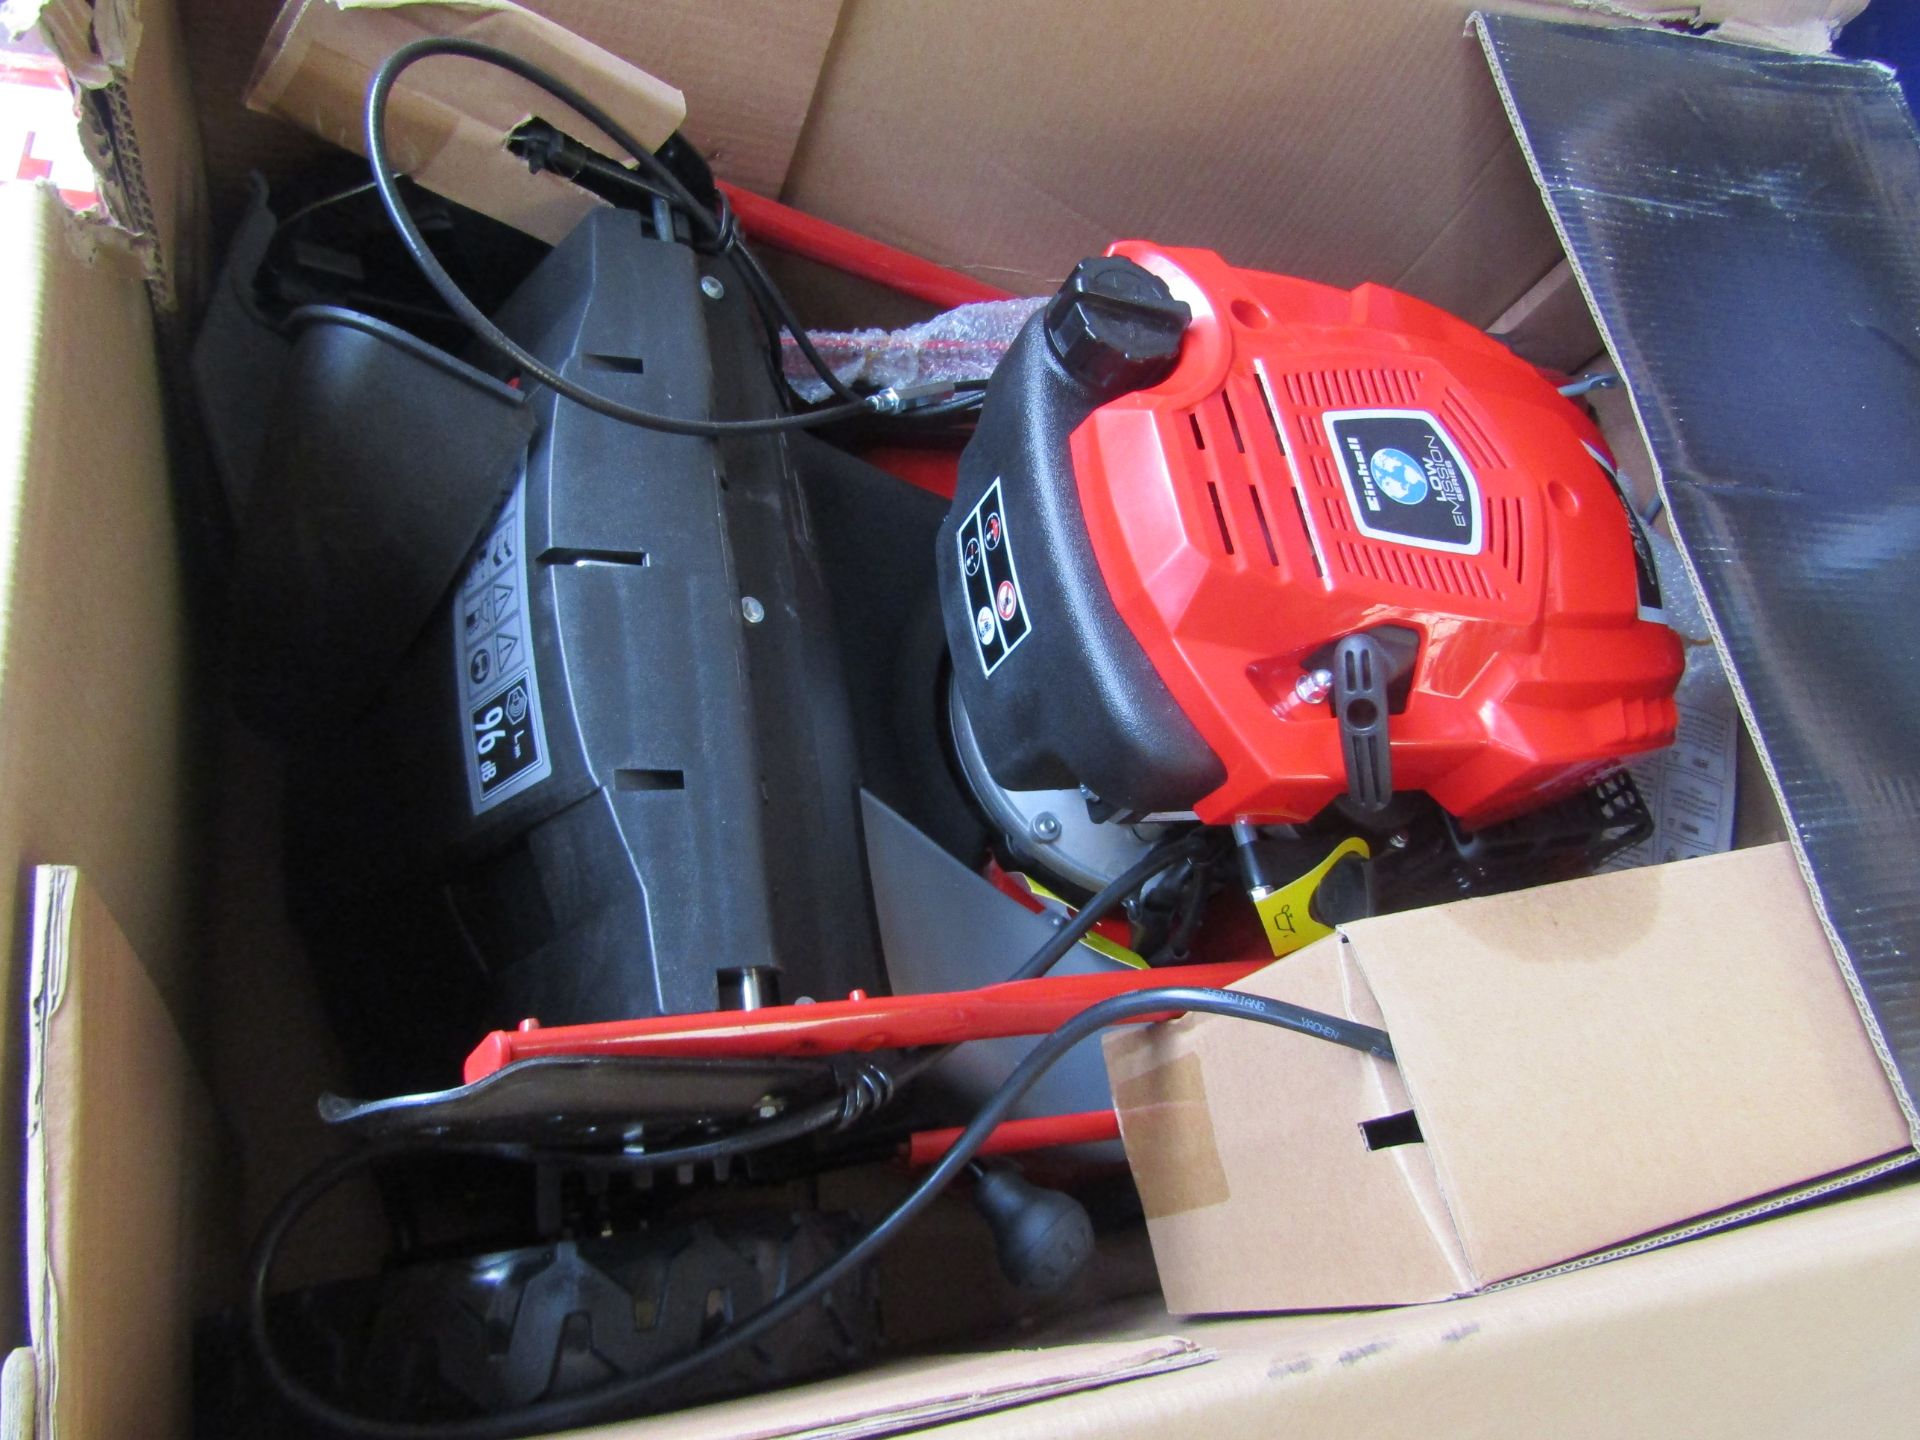 1x Einhell - GE-PM 48 S HW-E Li Petrol Lawnmower - Used Condition, Unchecked & Boxed. RRP £399 @